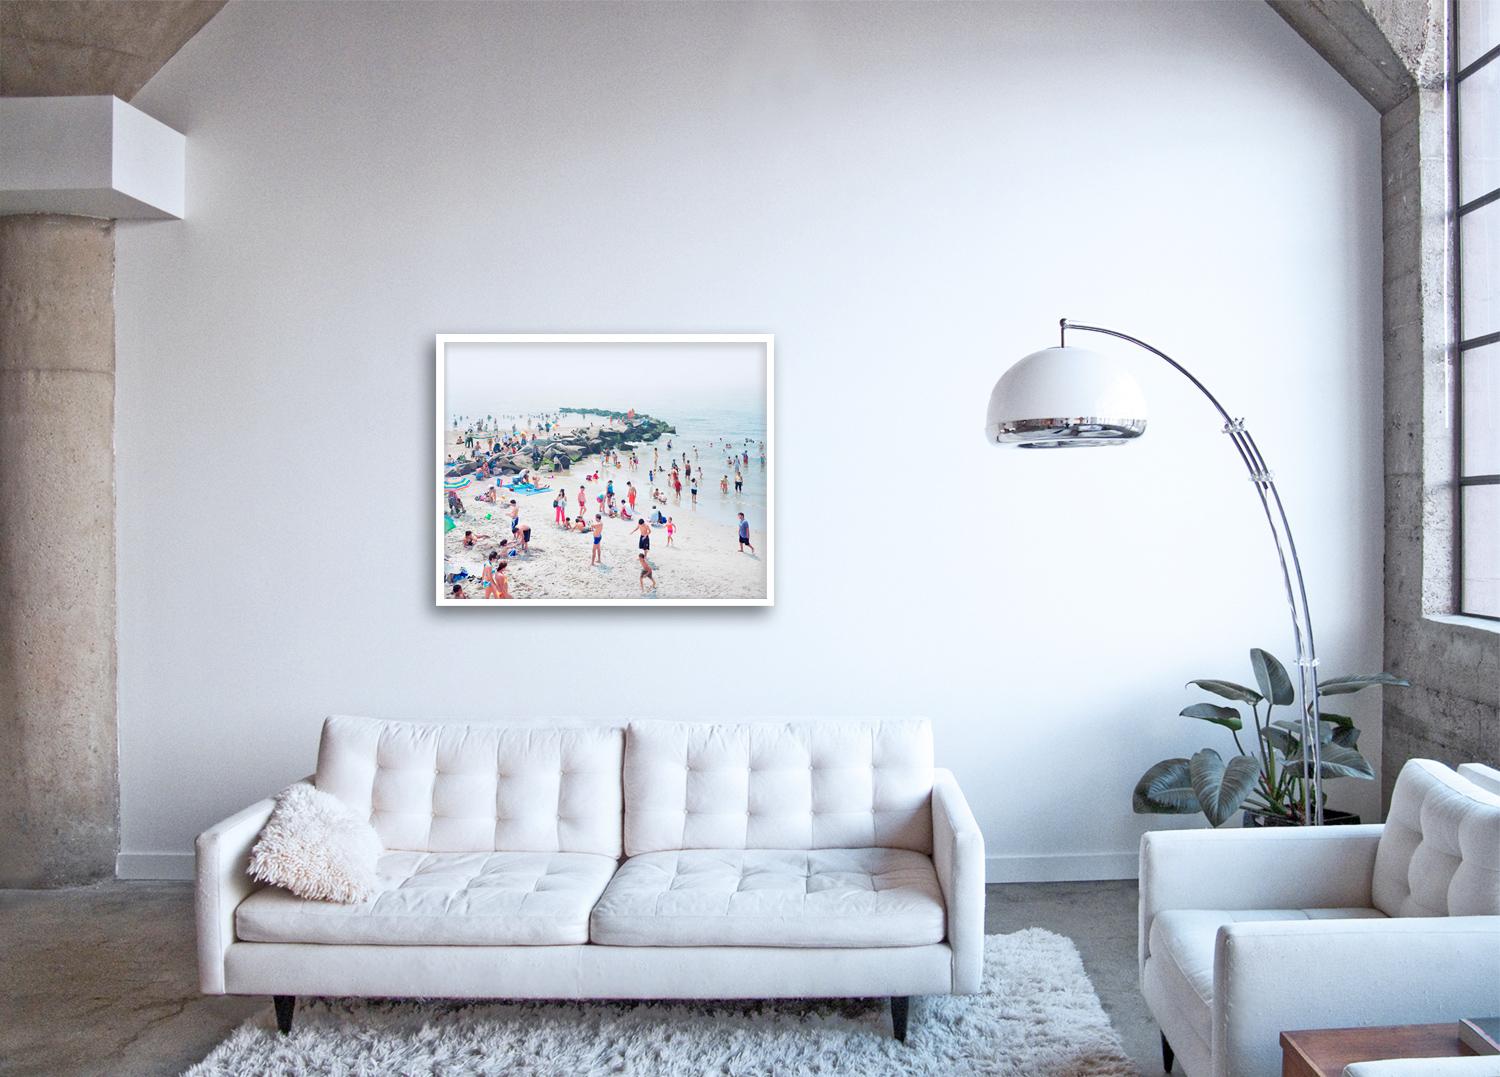 Meloria - large scale photograph of Mediterranean beach scene (artist framed) - Photograph by Massimo Vitali